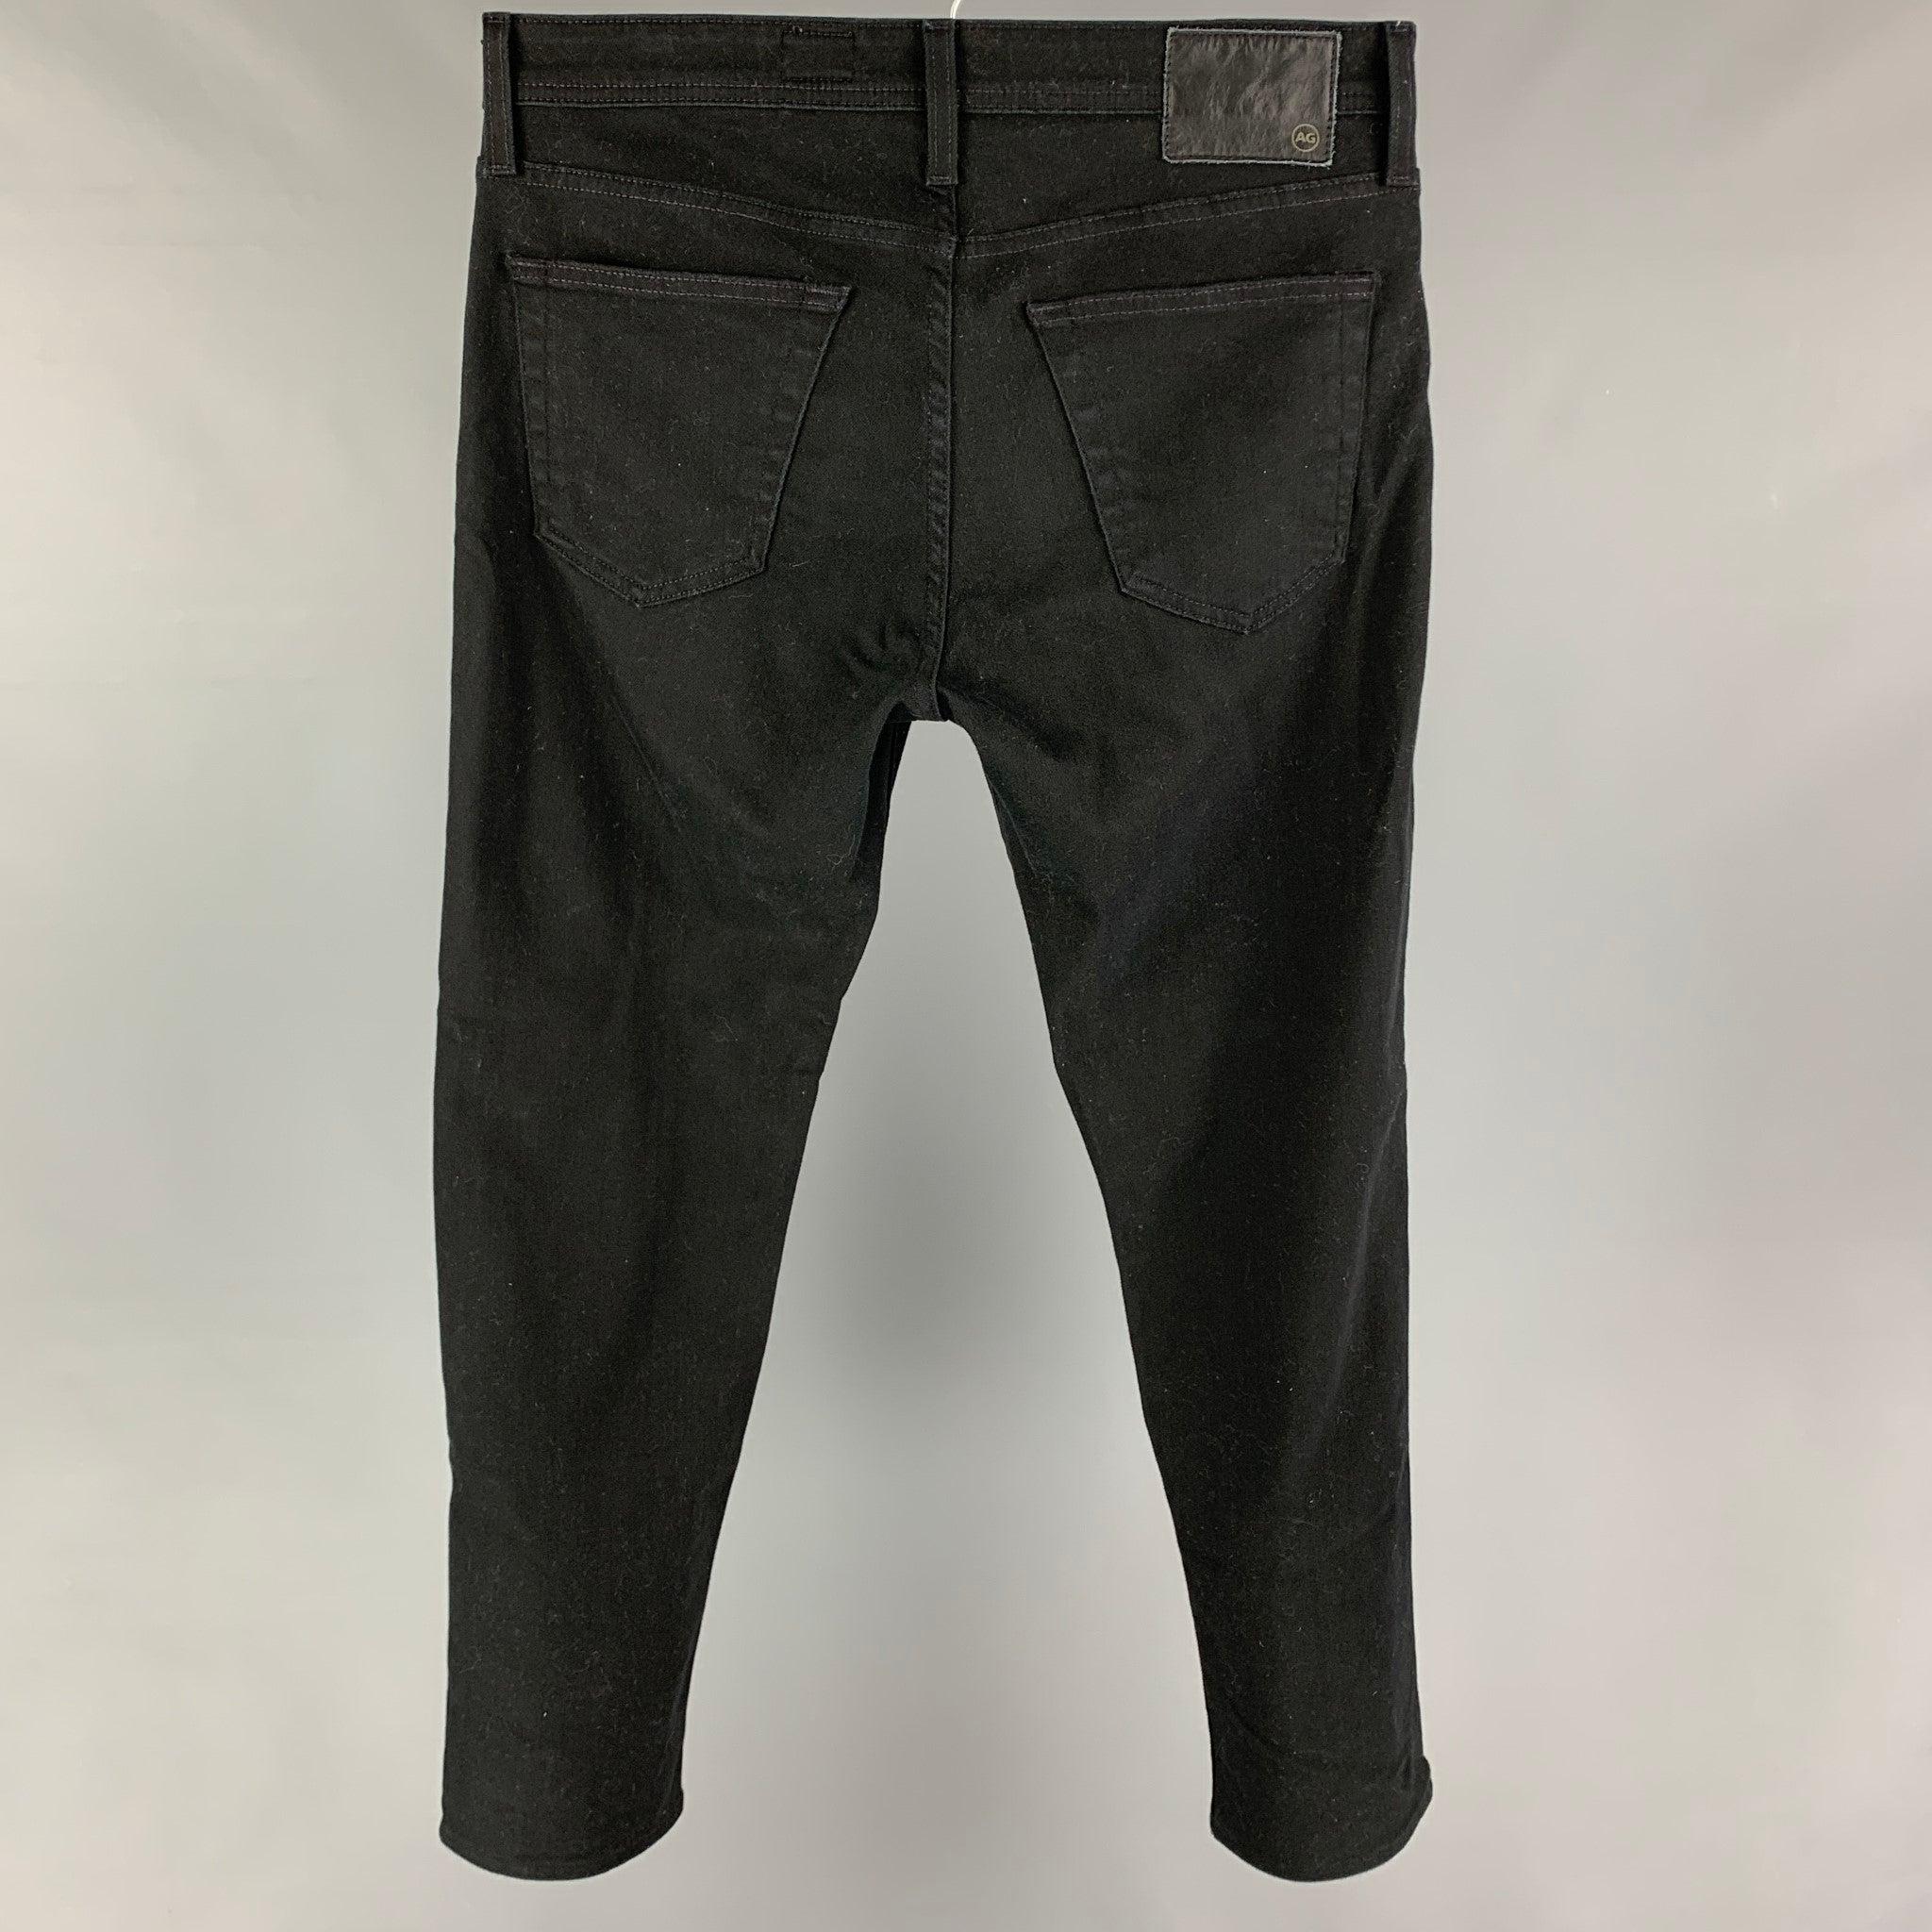 ADRIANO GOLDSCHMIED jeans comes in a black cotton / polyurethane featuring a slim-fit and a zip fly closure.
 Excellent
 Pre-Owned Condition. 
 

 Marked:  32x32 
 

 Measurements: 
  Waist: 34 inches Rise: 10 inches Inseam: 30 inches Leg Opening: